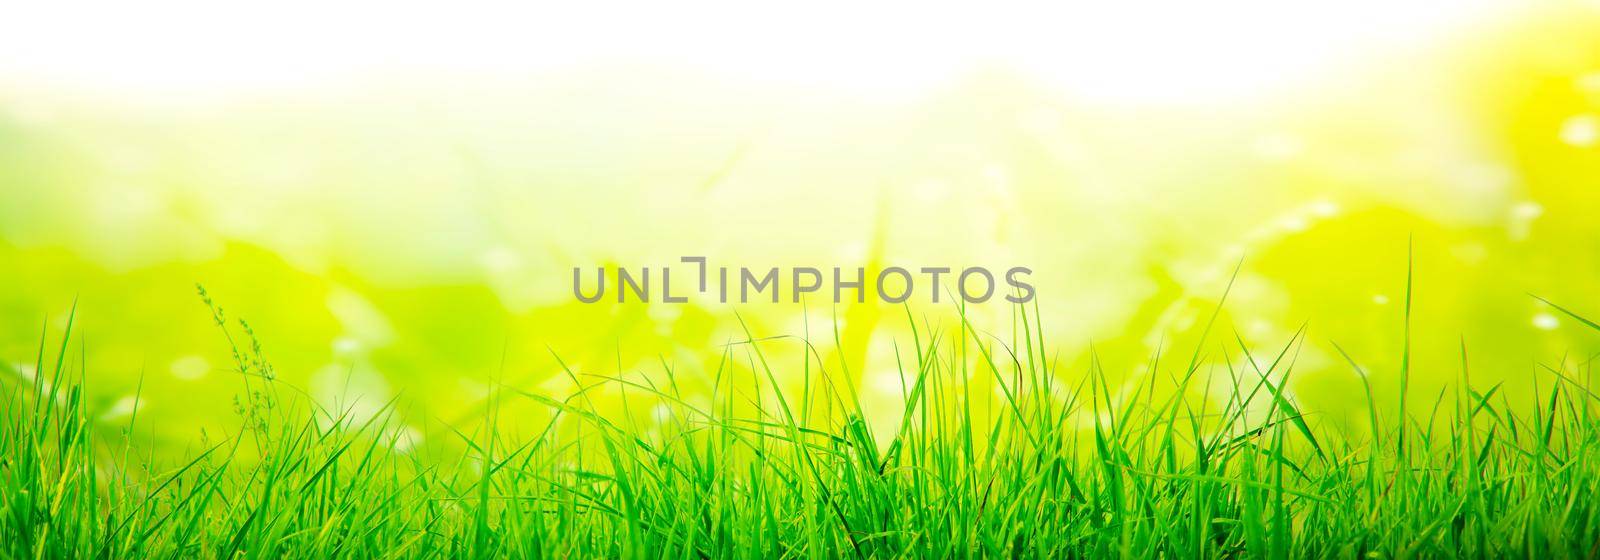 Grass flower field in spring background with sunlight